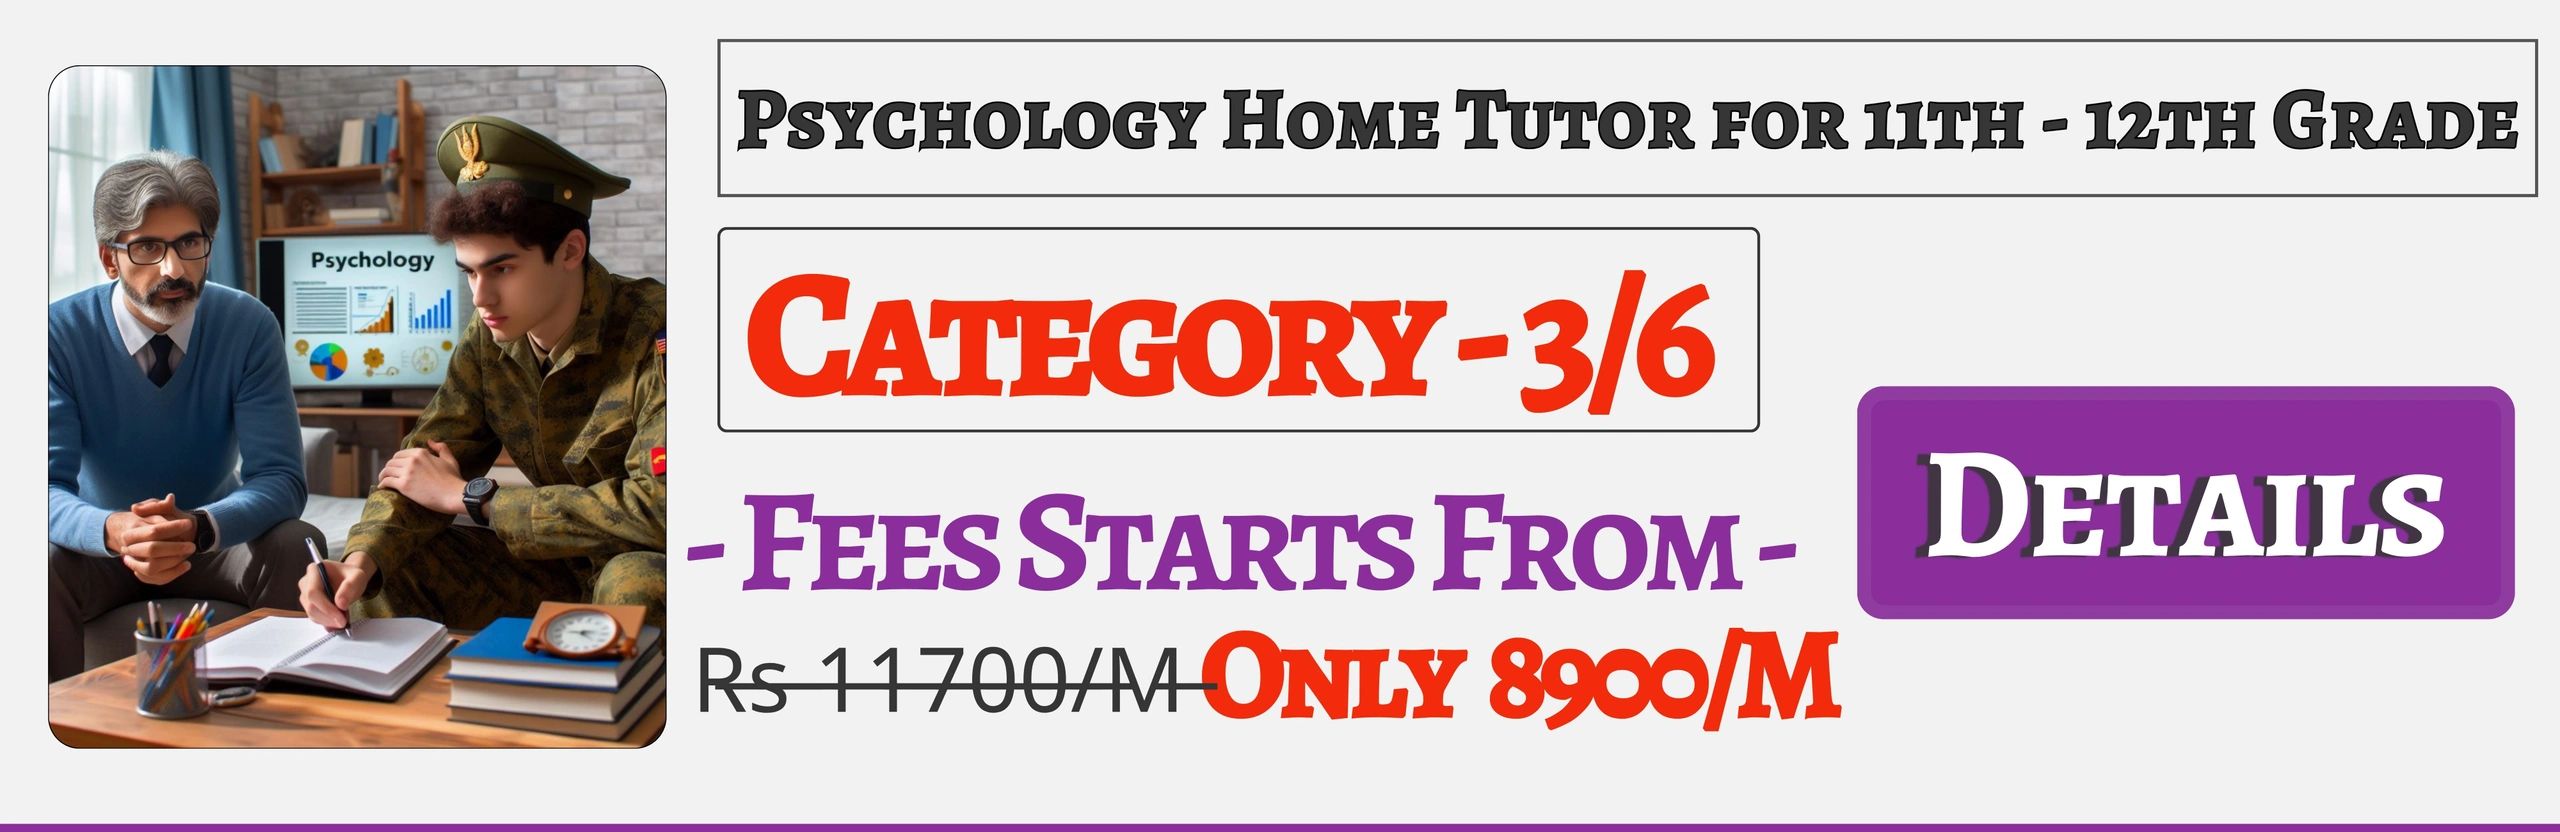 Book Best Nearby Psychology Home Tuition Tutors For 11th & 12th In Jaipur , Fees Only 8900/M